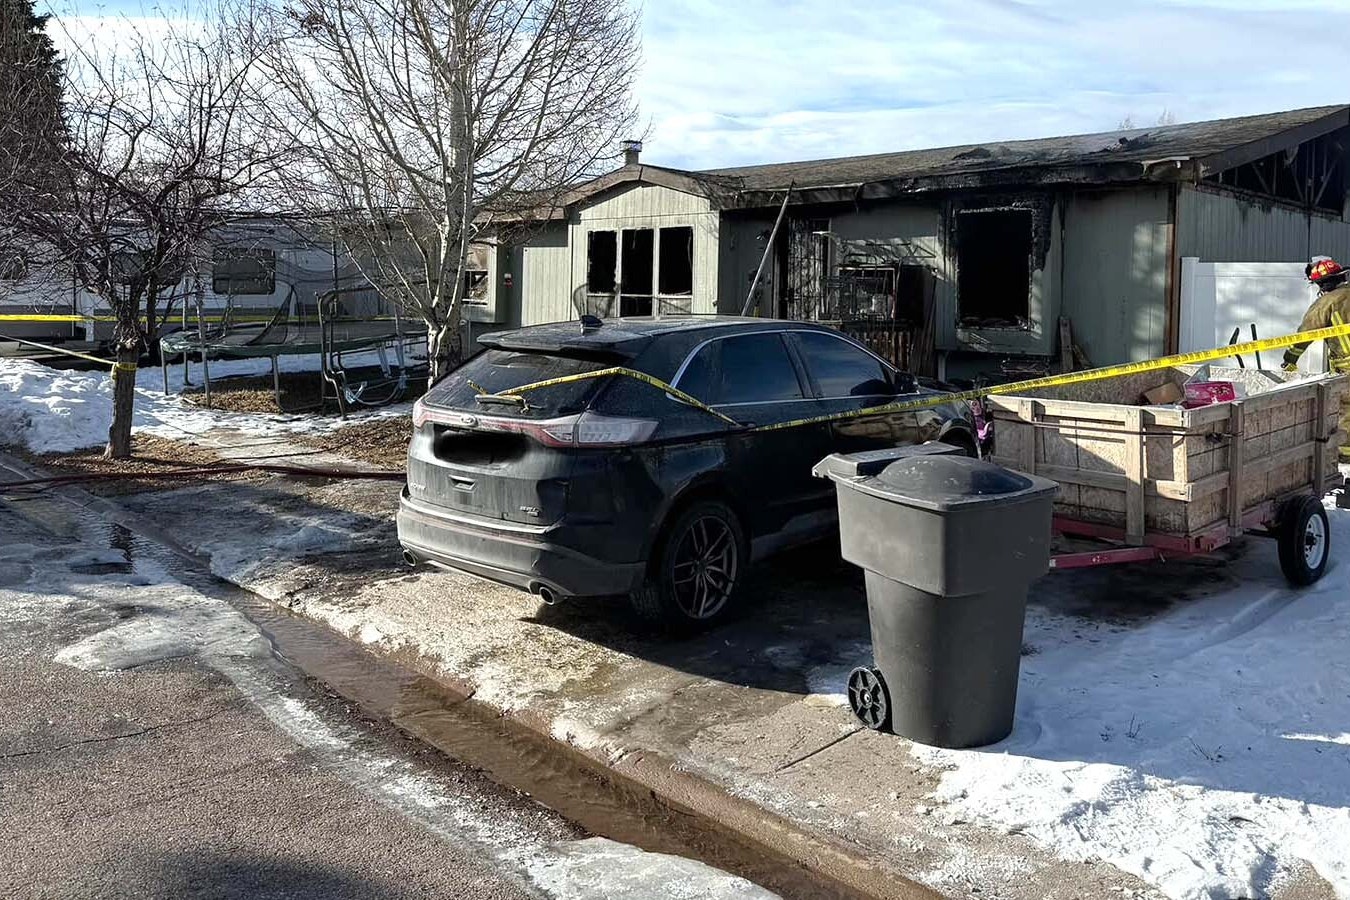 A Uinta County firefighter cleans up Saturday after an early morning fire in this mobile home on Worland Circle in Evanston that claimed the lives of two children, ages 6 and 3, and an adult family member.